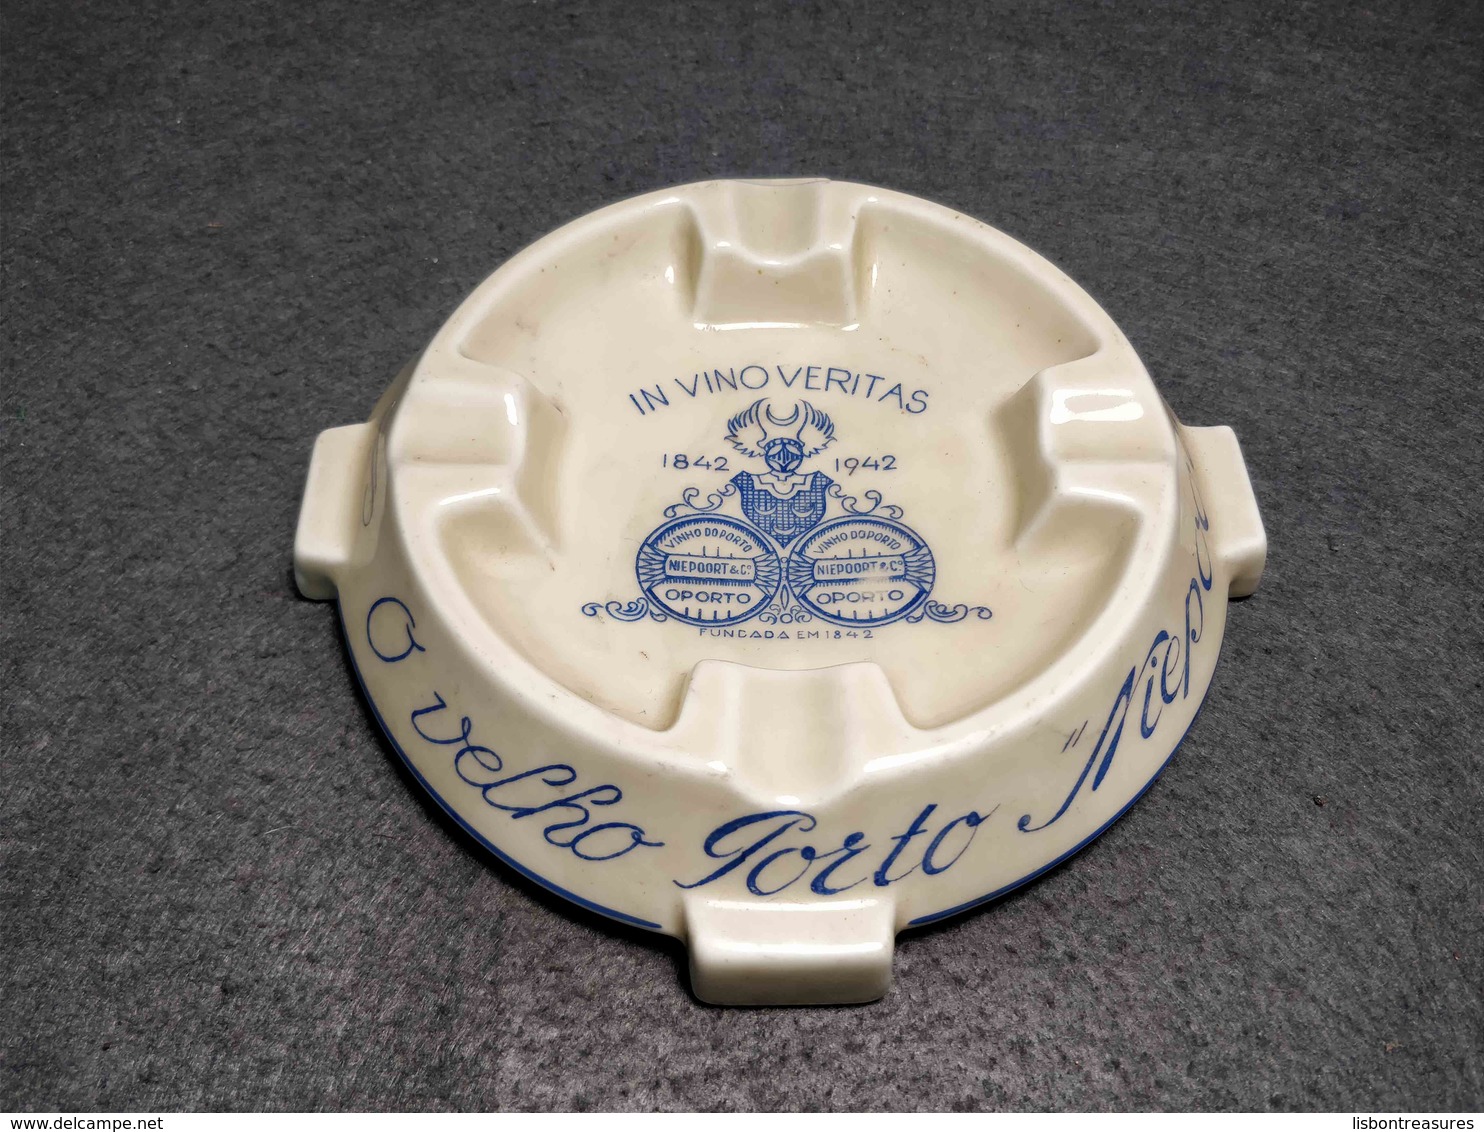 RARE VINTAGE PORCELAIN ASHTRAY ADVERTISING " NIEEPORT" PORT WINE MADE IN PORTUGAL BY CANDAL - Porcellana